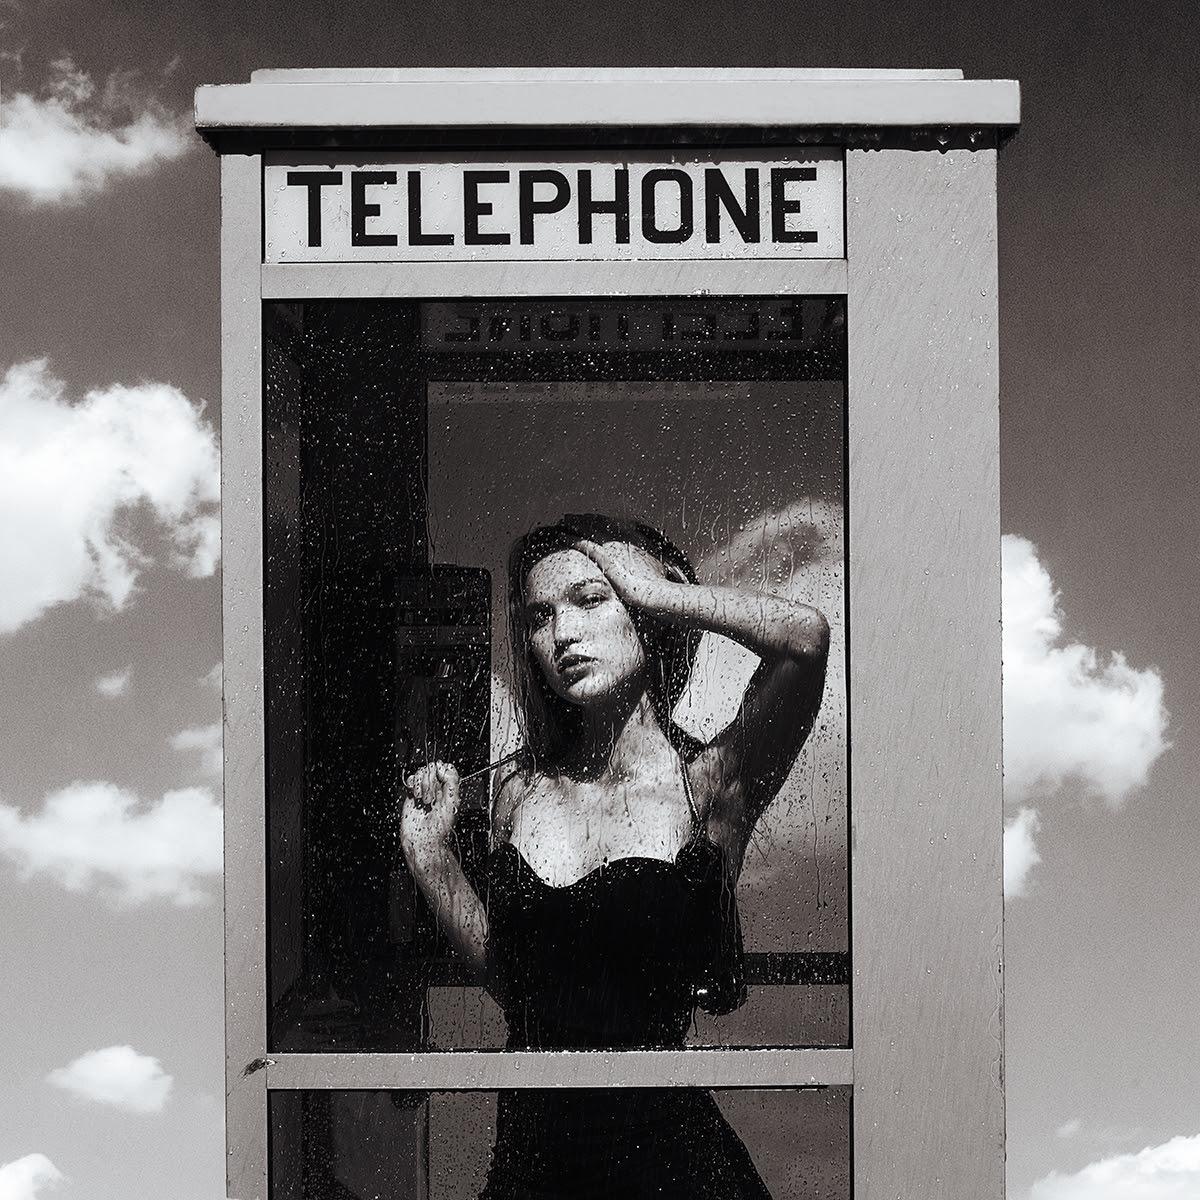 Tyler Shields - The Girl in the Phone Booth (45" x 45")